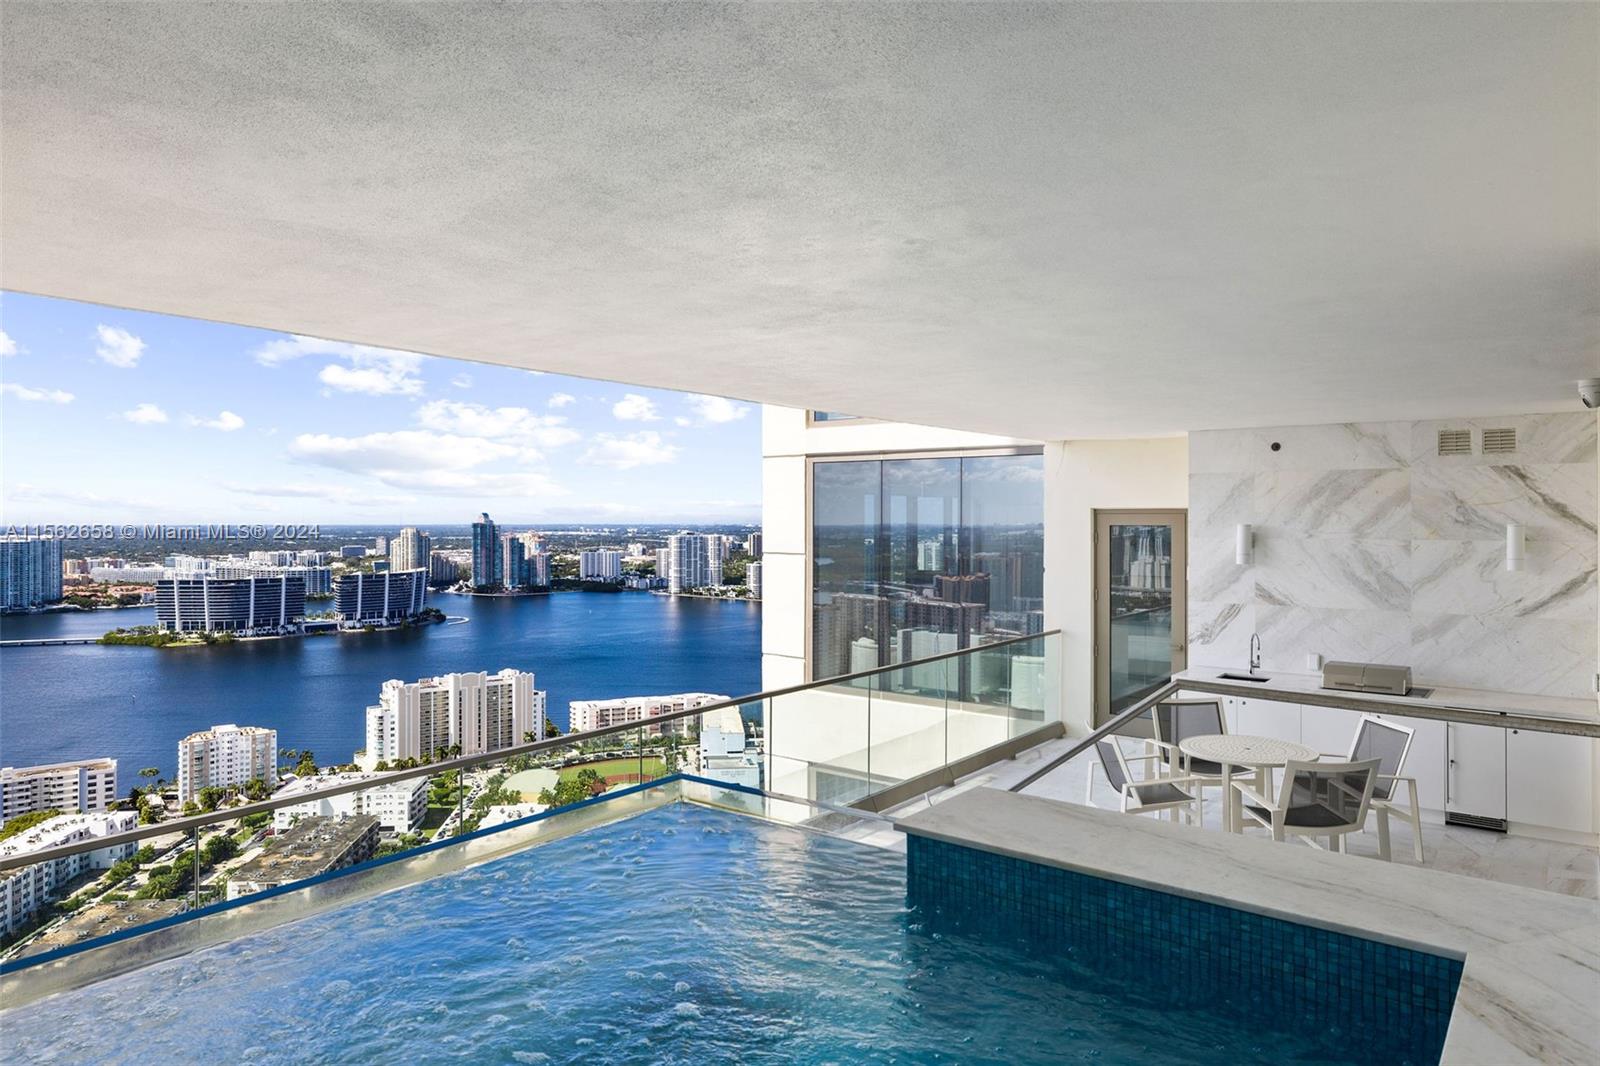 Custom one-of-a-kind 06 unit with its own private swimming pool. This masterpiece of opulence is located on the 34th floor of the ultraluxurious & secure Estates at Acqualina in Sunny Isles Beach. Boasting 3 generously appointed bedrooms & 4.5 lavishly designed onyx & marble bathrooms, meticulously crafted to cater to those who seek the pinnacle of coastal oceanfront living designed to ensure utmost privacy & comfort. Primary Suite encompasses the bedroom with glorious sunset views, substantial bathroom inc shower, free standing tub, 2 sinks, Toto toilet, and Italian closets. Beautifully appointed Living/Dining areas with a high-end kitchen and La Cornue stove, all at the highest level of quality, which lead onto the generously scaled swimming pool terrace. A must see and easy to show.